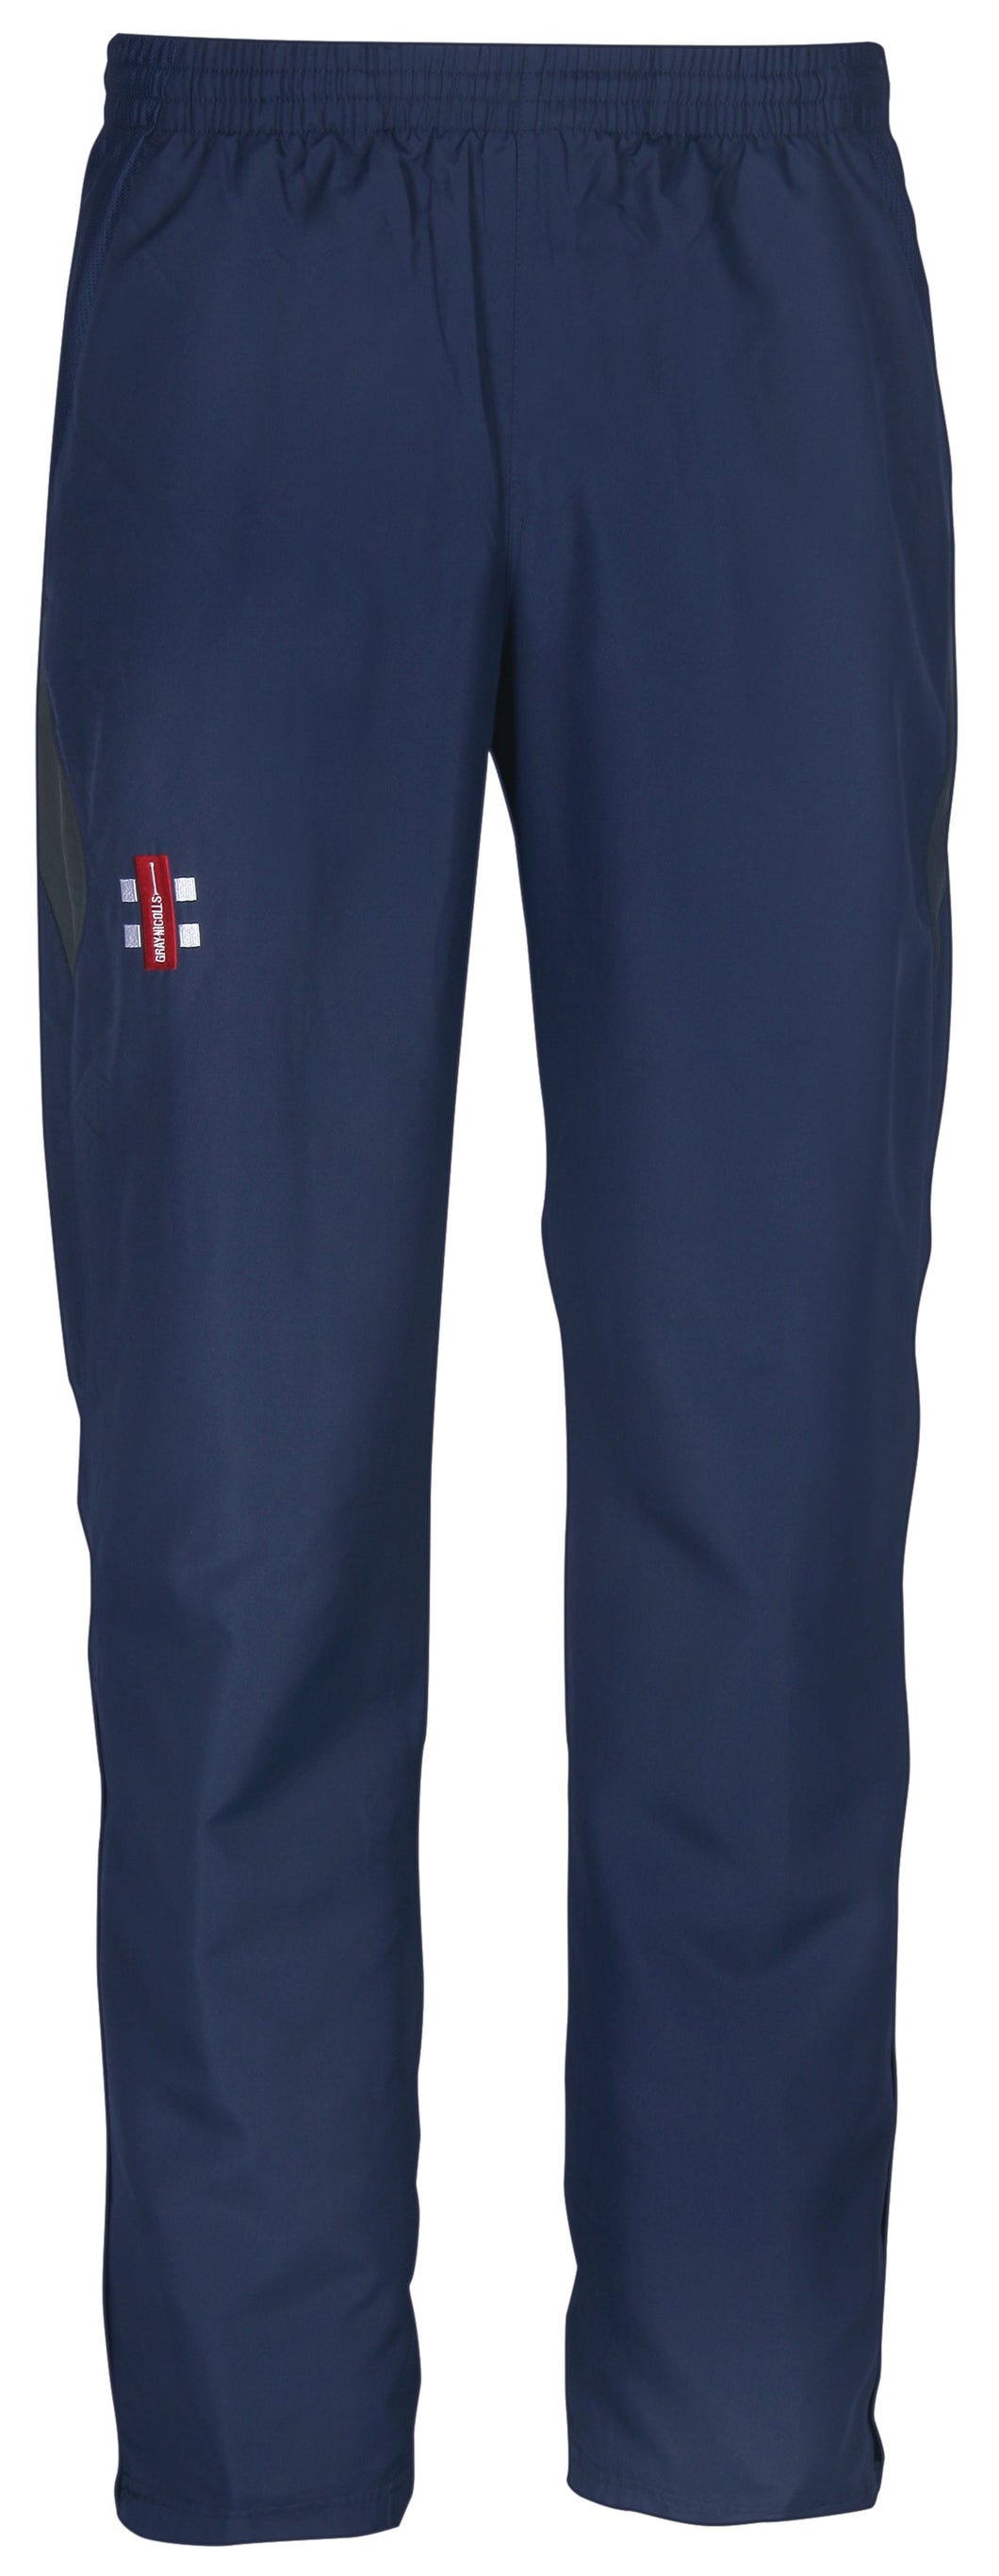 East Yorkshire Womens / Girls CC Tracksuit Trousers